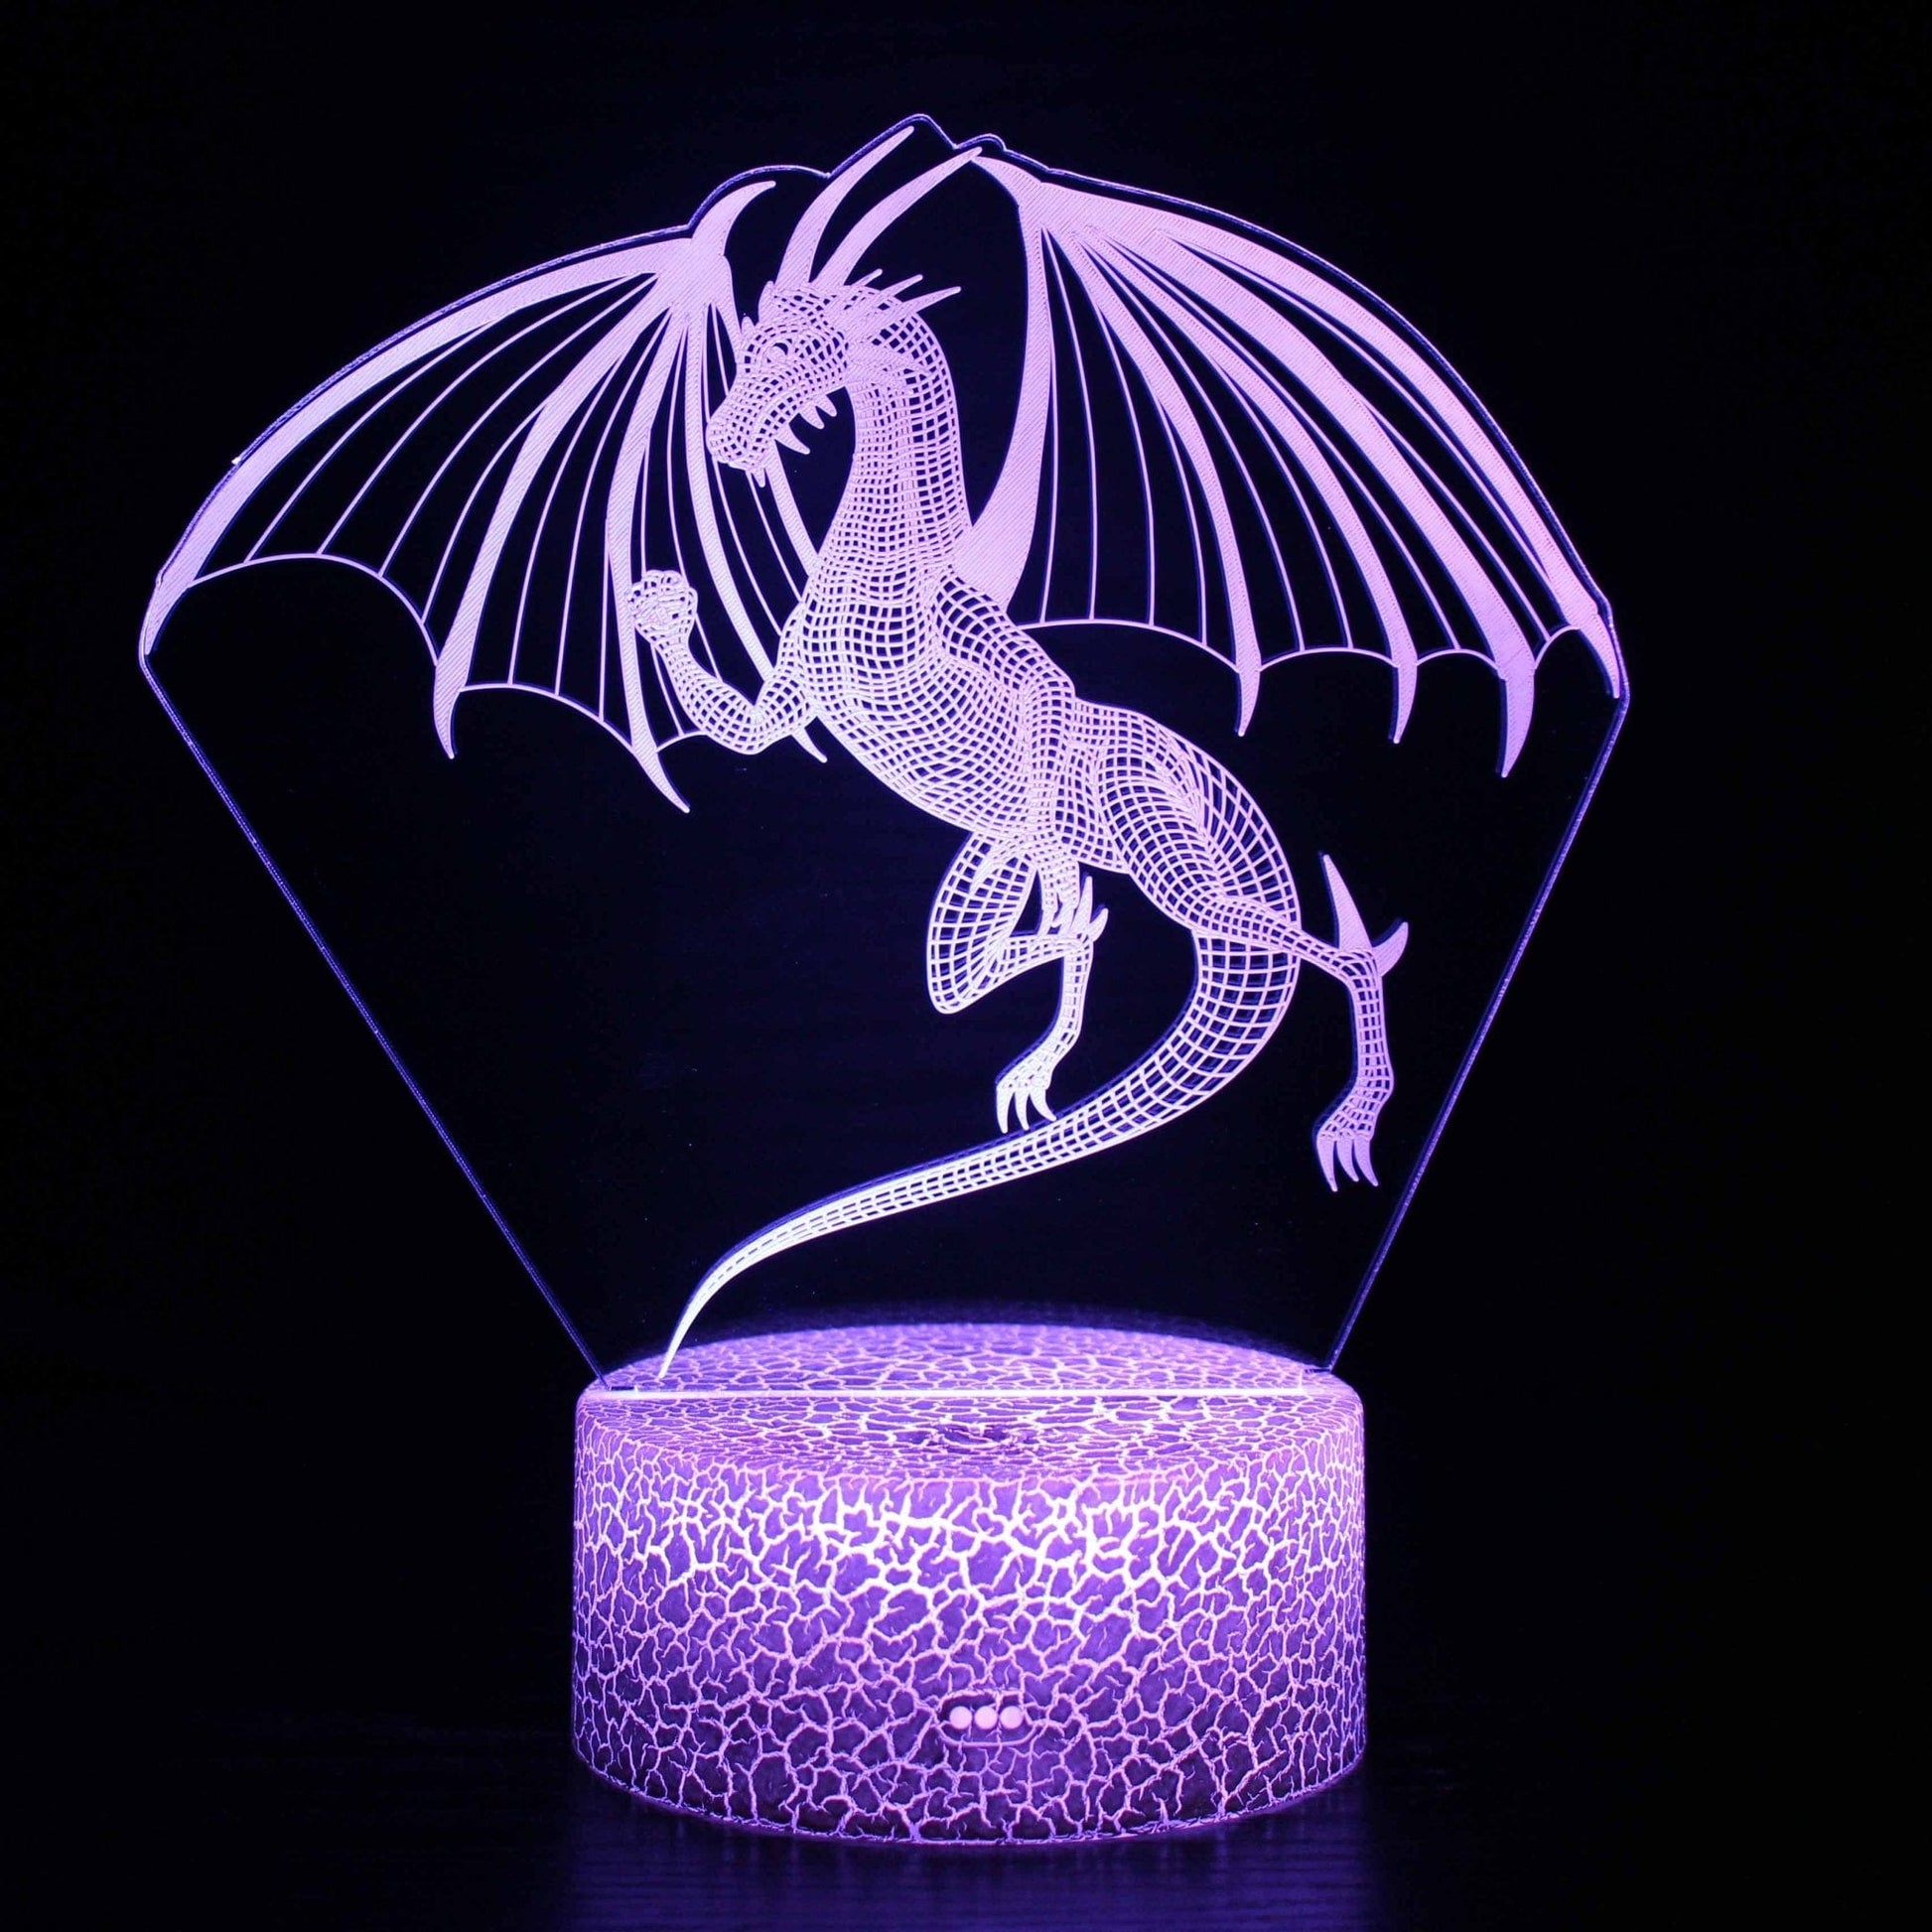 Dinosaur Series 3D Table Lamp LED Colorful Touch Remote Control Gift Nightlight - CLASSY CLOSET BOUTIQUEDinosaur Series 3D Table Lamp LED Colorful Touch Remote Control Gift NightlighteperloCF79ECCAB3D6435688109B1DEABAC630KX-18627 Colors No Remote